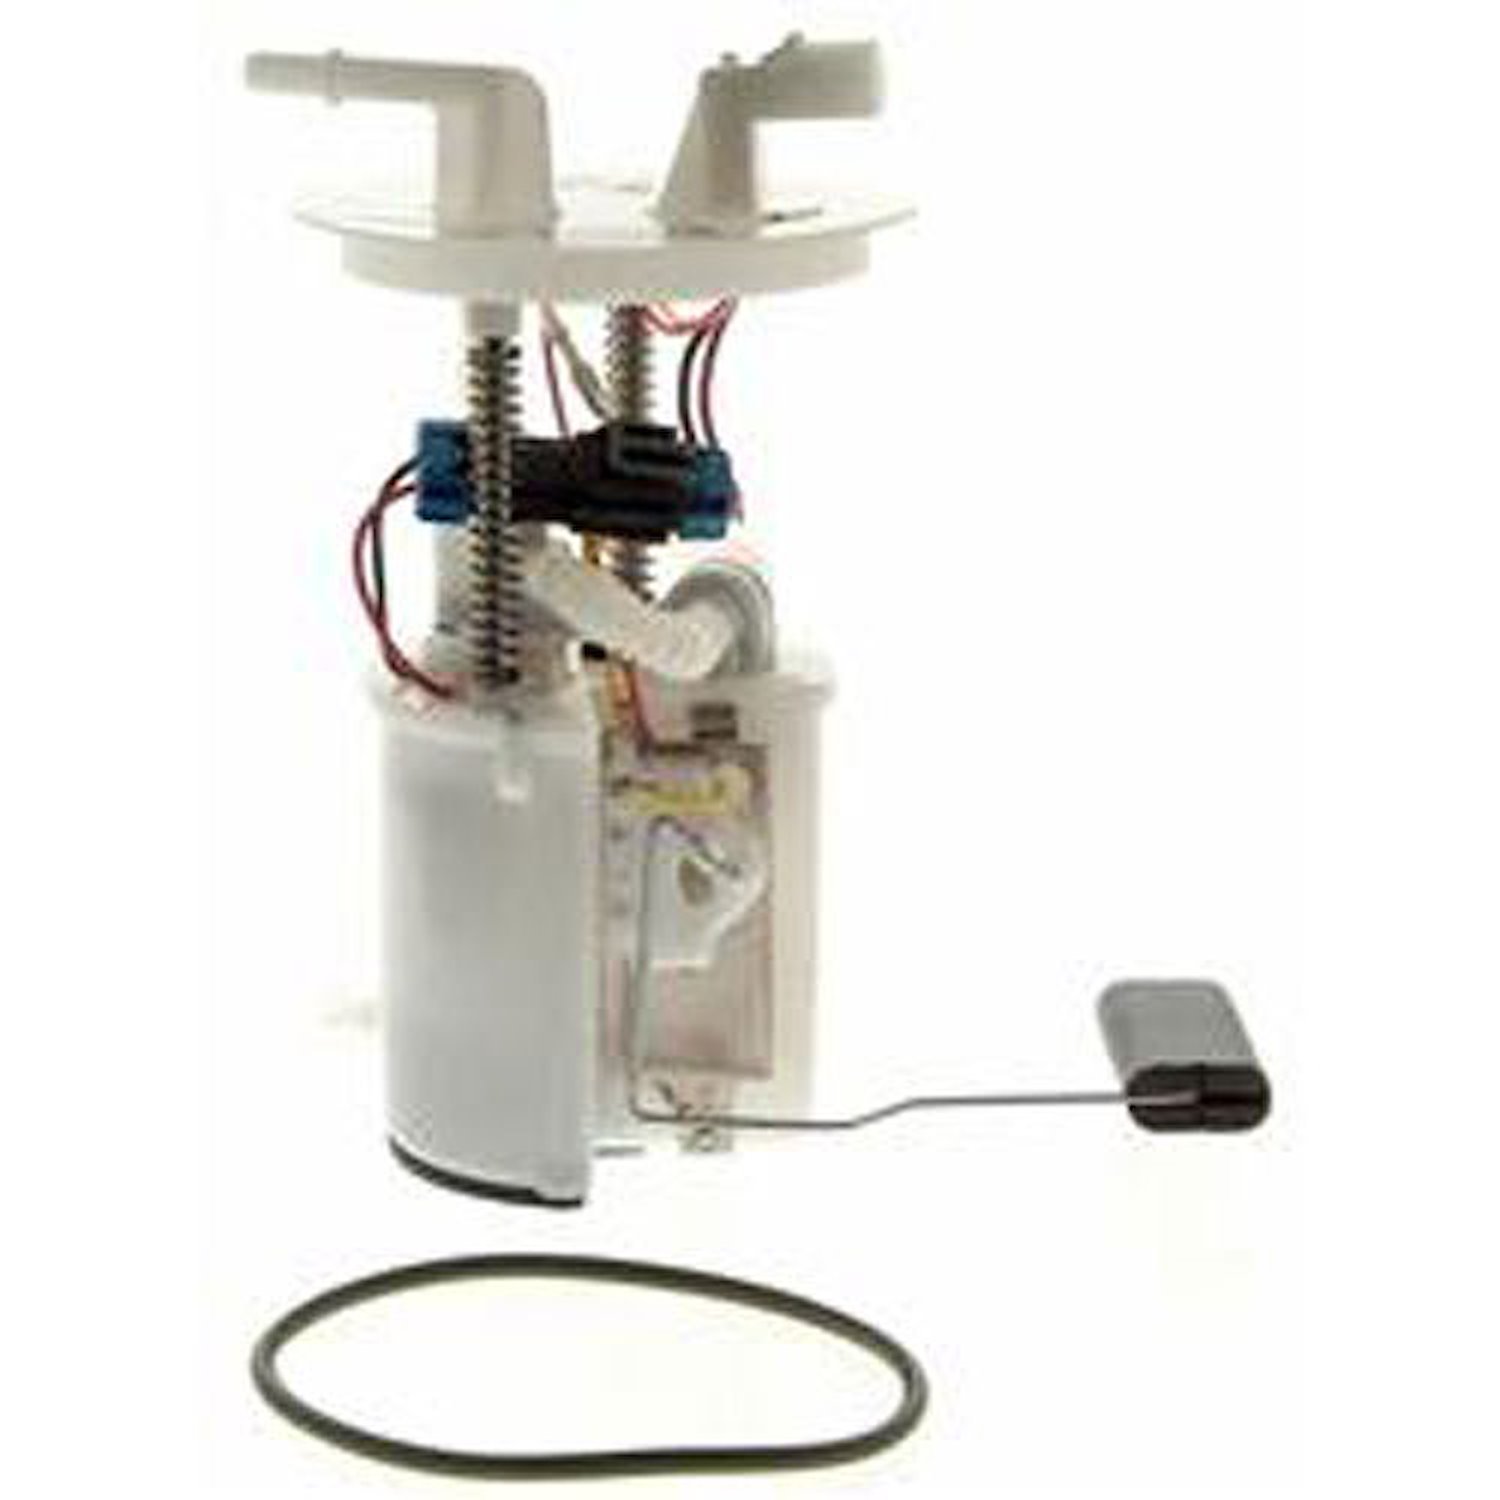 OE Ford Replacement Electric Fuel Pump Module Assembly 2004-06 Ford Taurus 3.0L V6